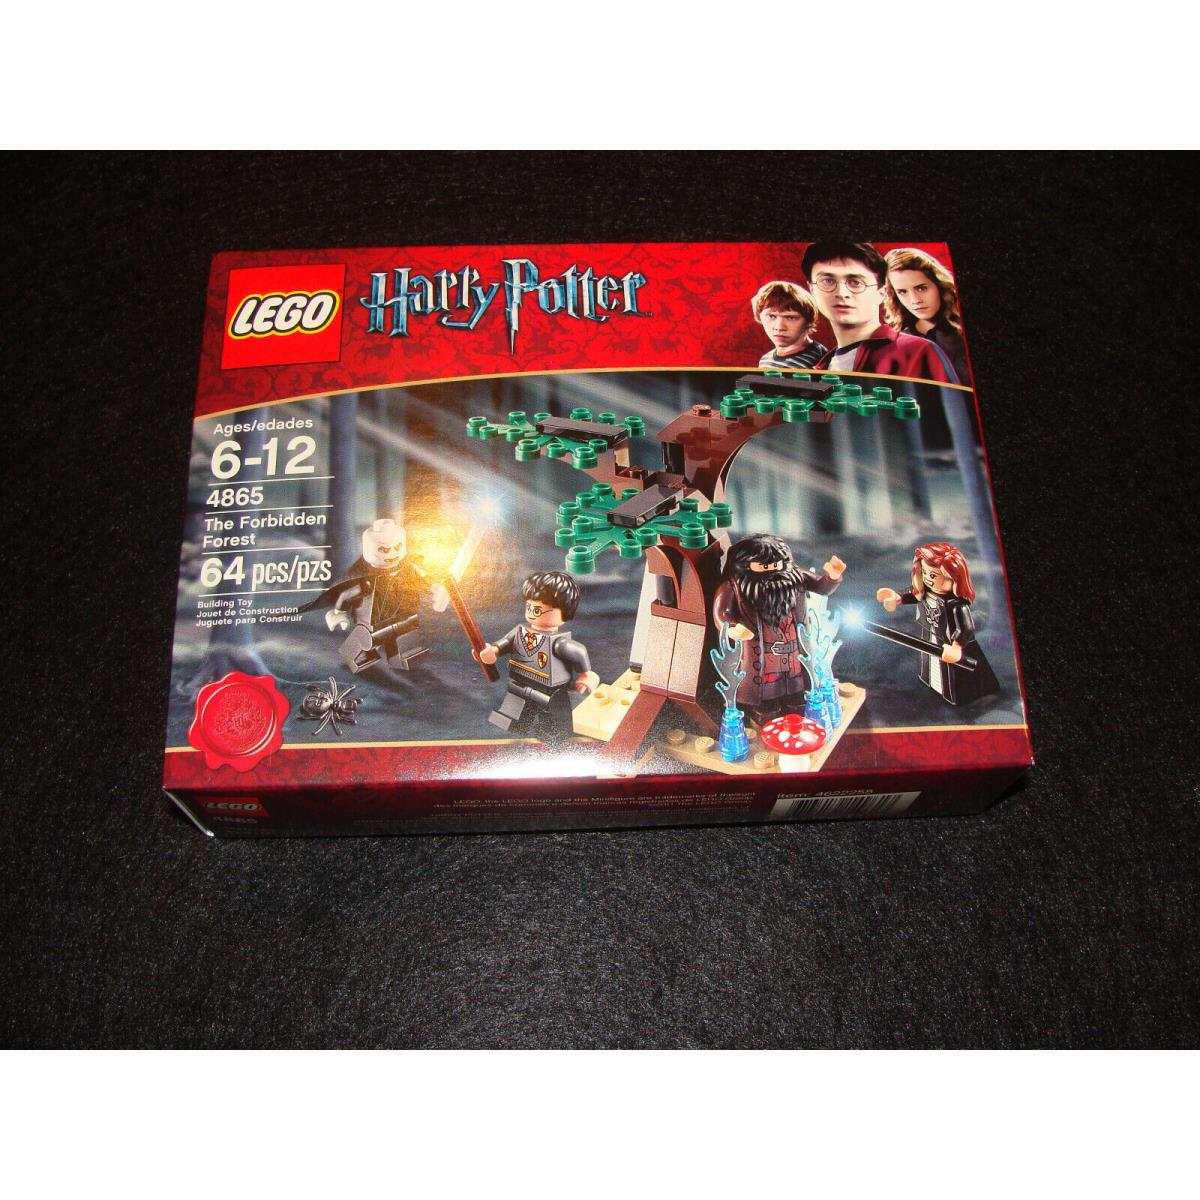 Lego 4865 Harry Potter The Forbidden Forest Nice Box